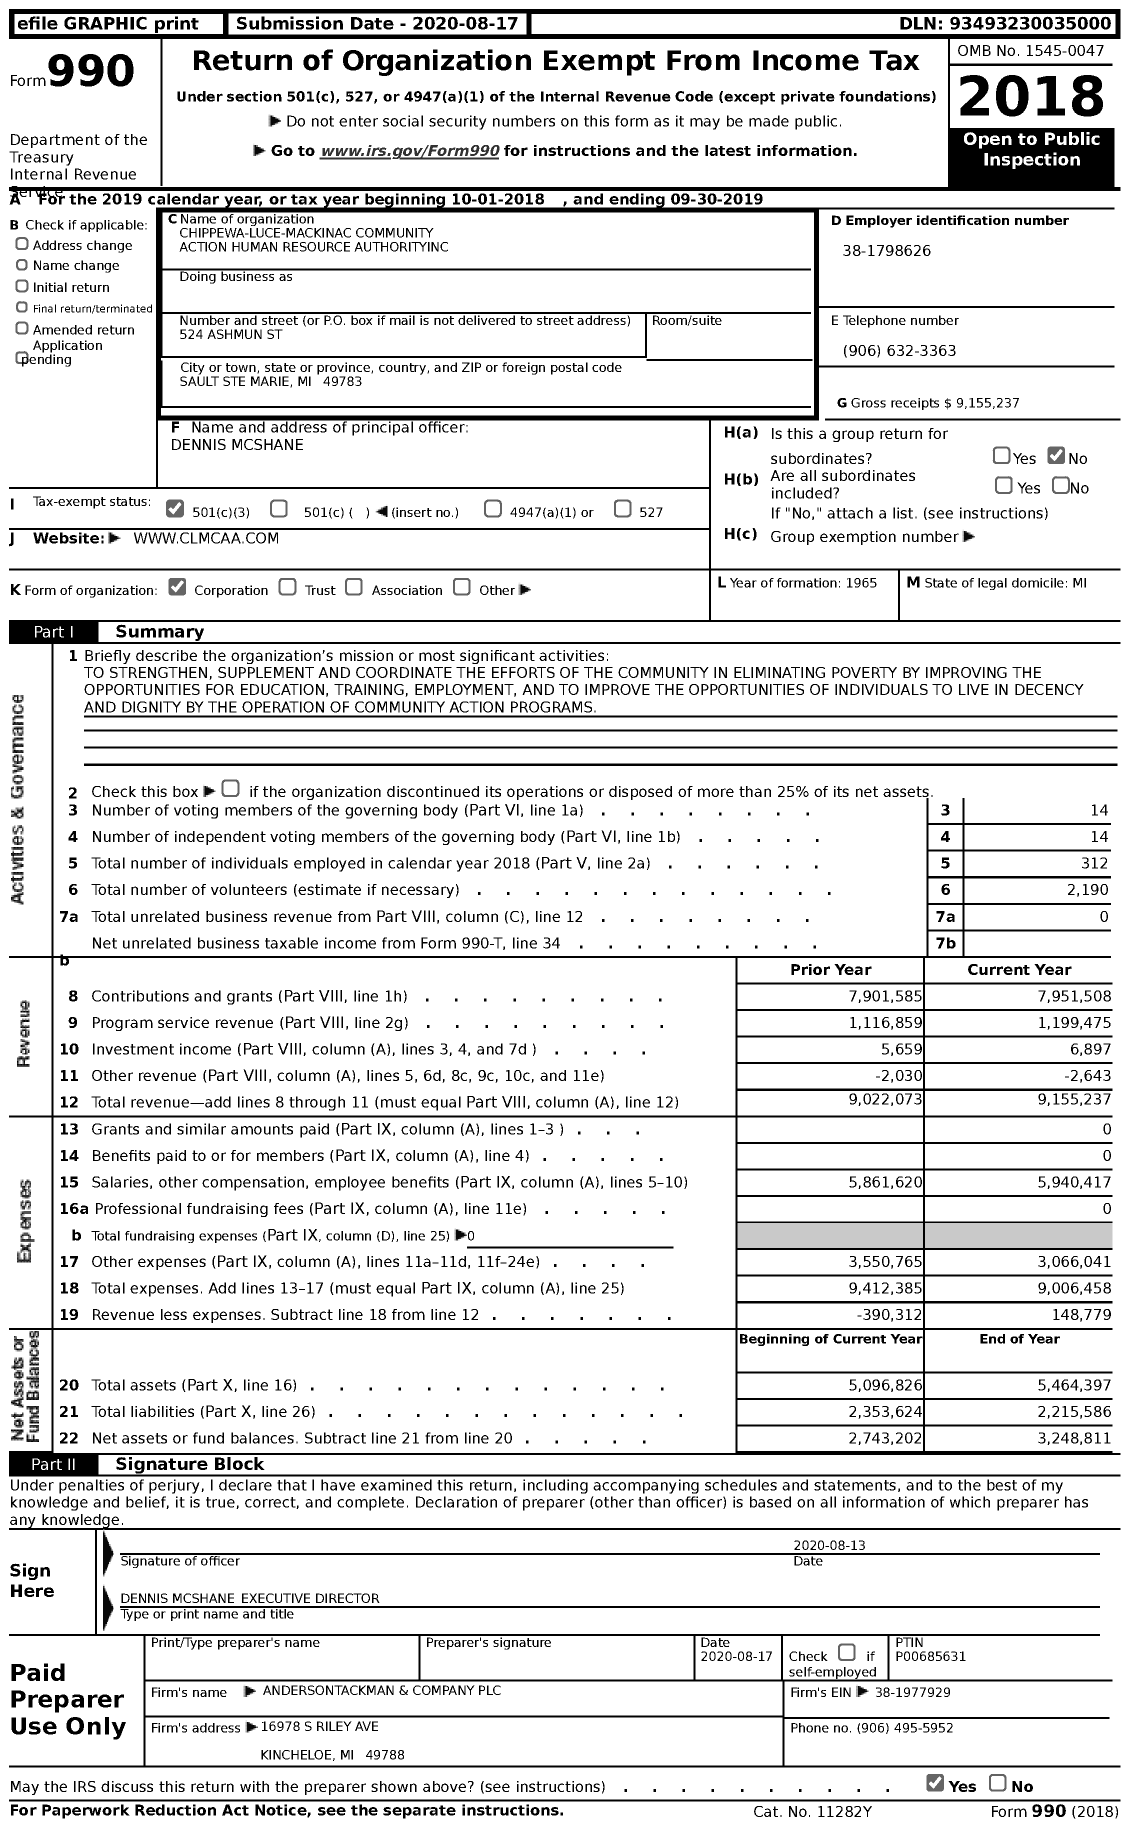 Image of first page of 2018 Form 990 for Chippewa-Luce-Mackinac Community Action Human Resource Authority